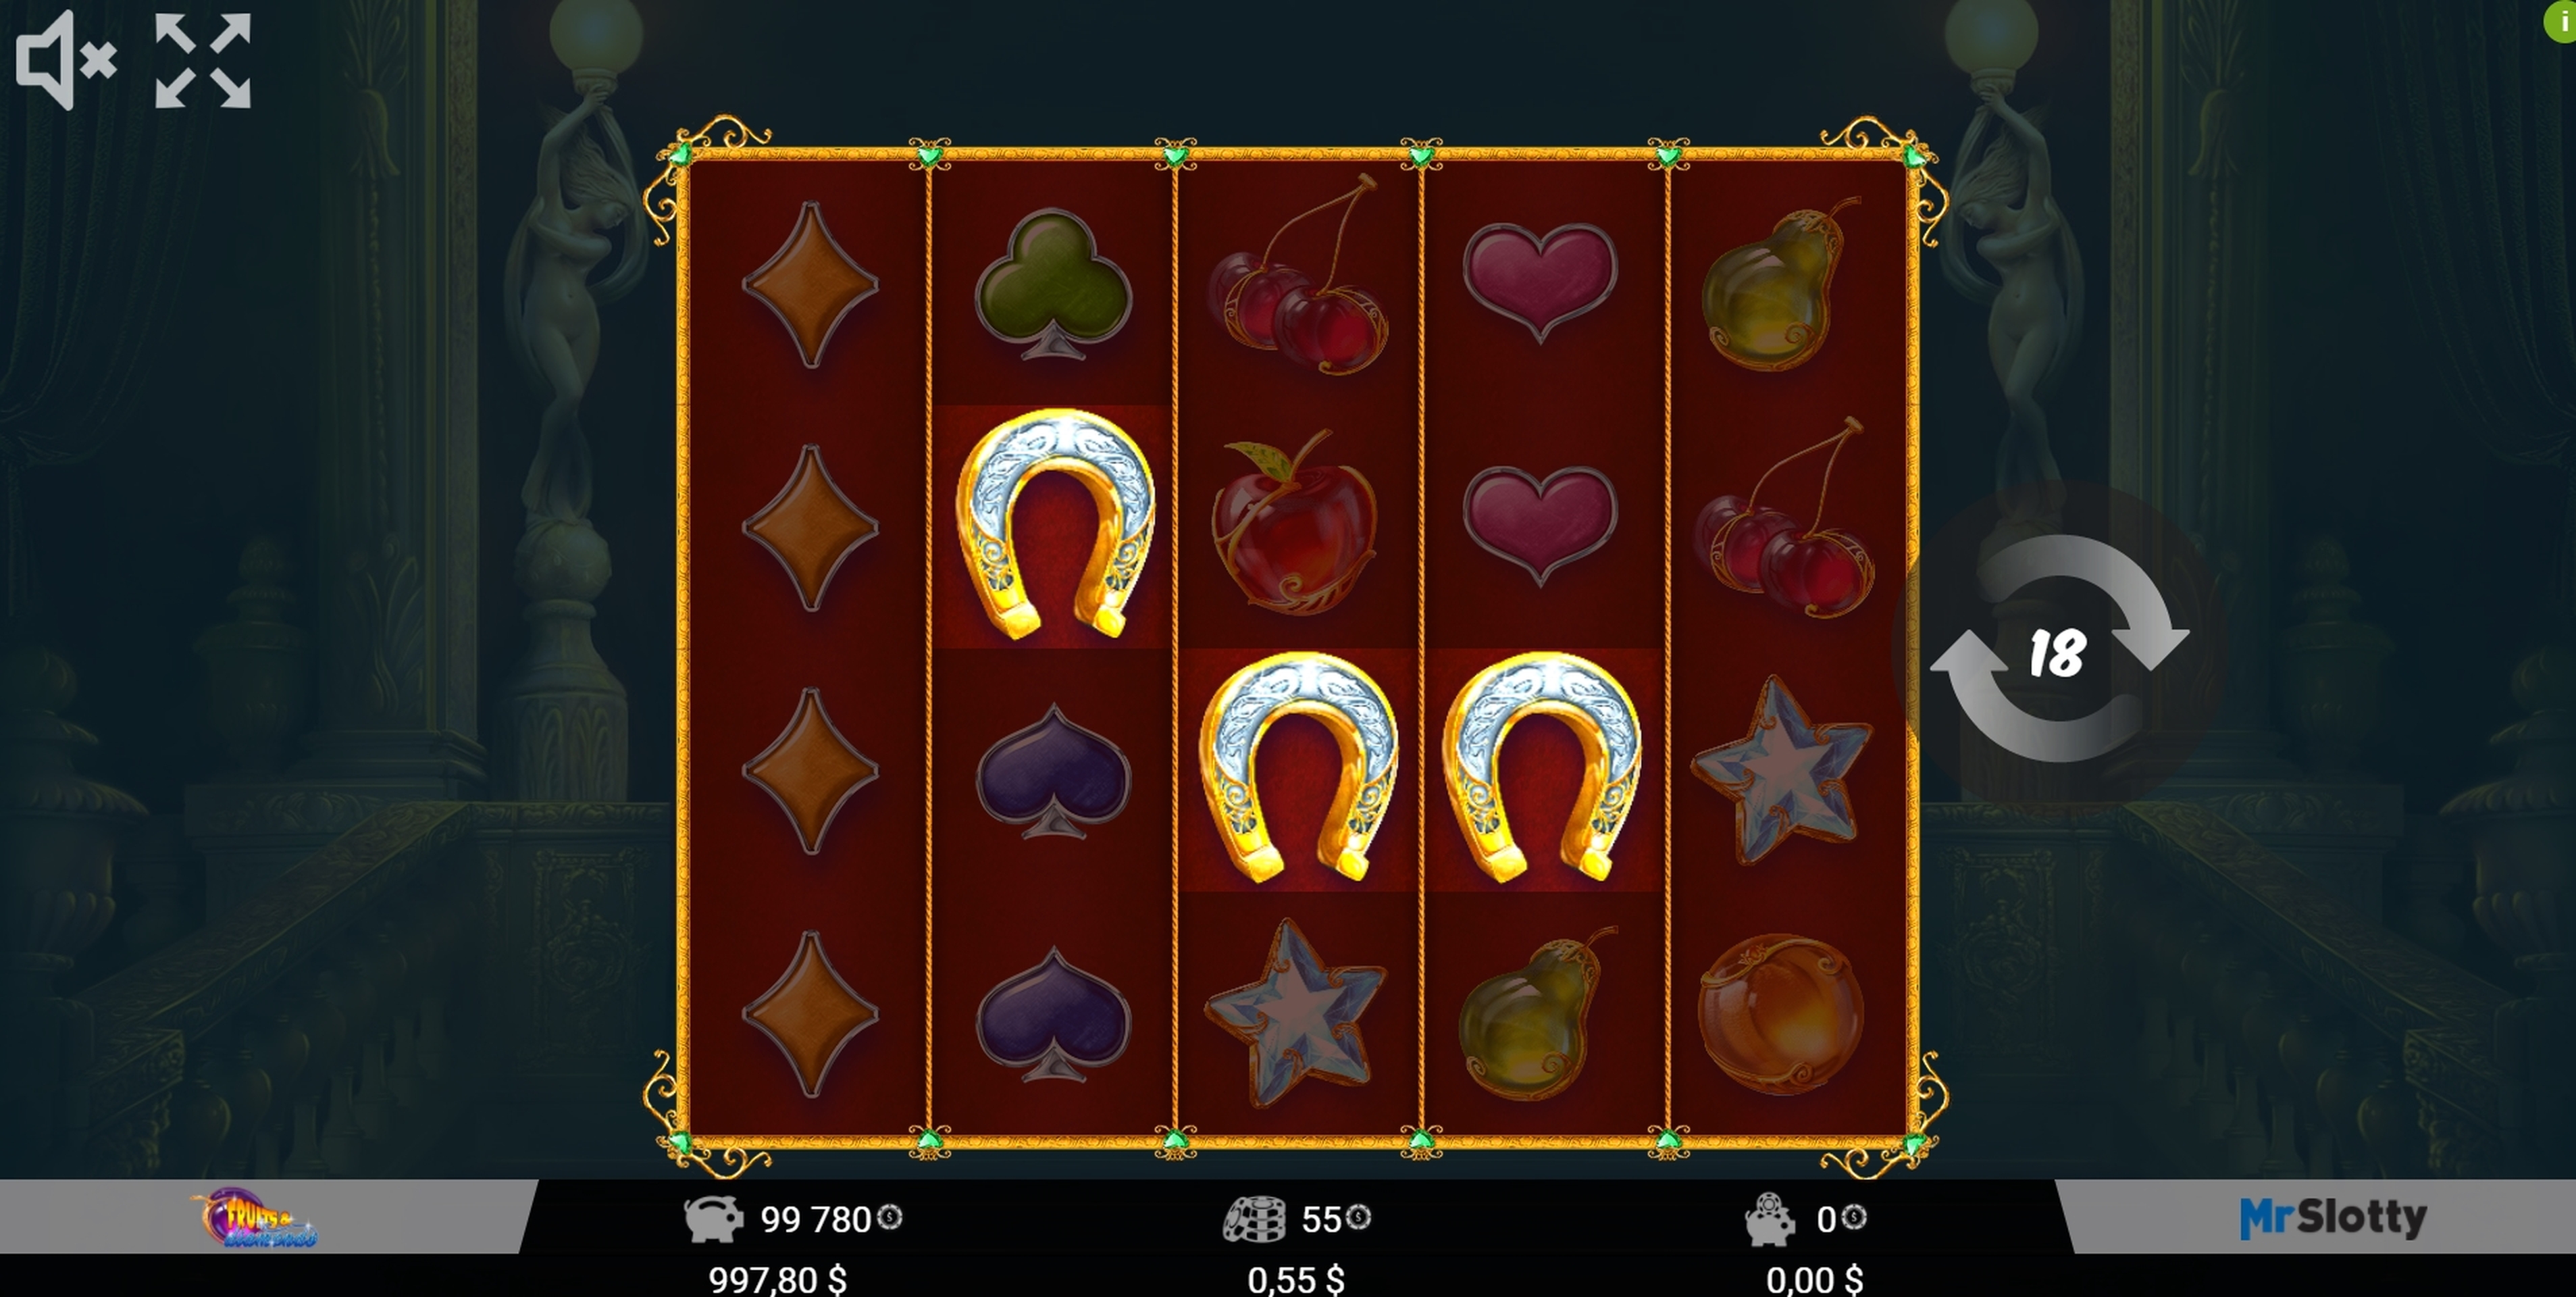 Win Money in Fruits & Diamonds Free Slot Game by Mr Slotty